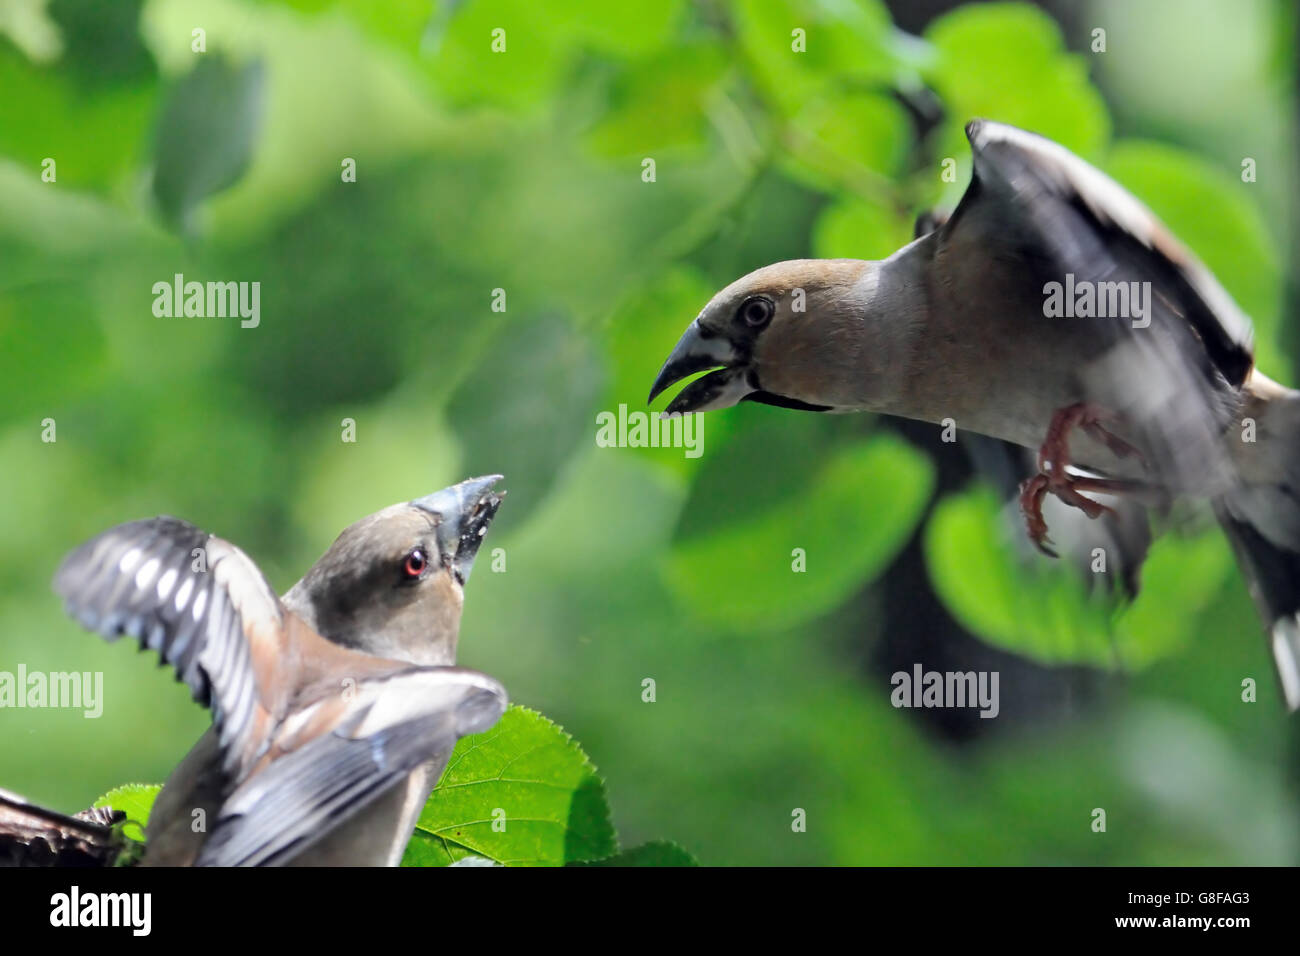 Two female hawfinches (Coccothraustes coccothraustes ) battle in flight. Moscow region, Russia Stock Photo